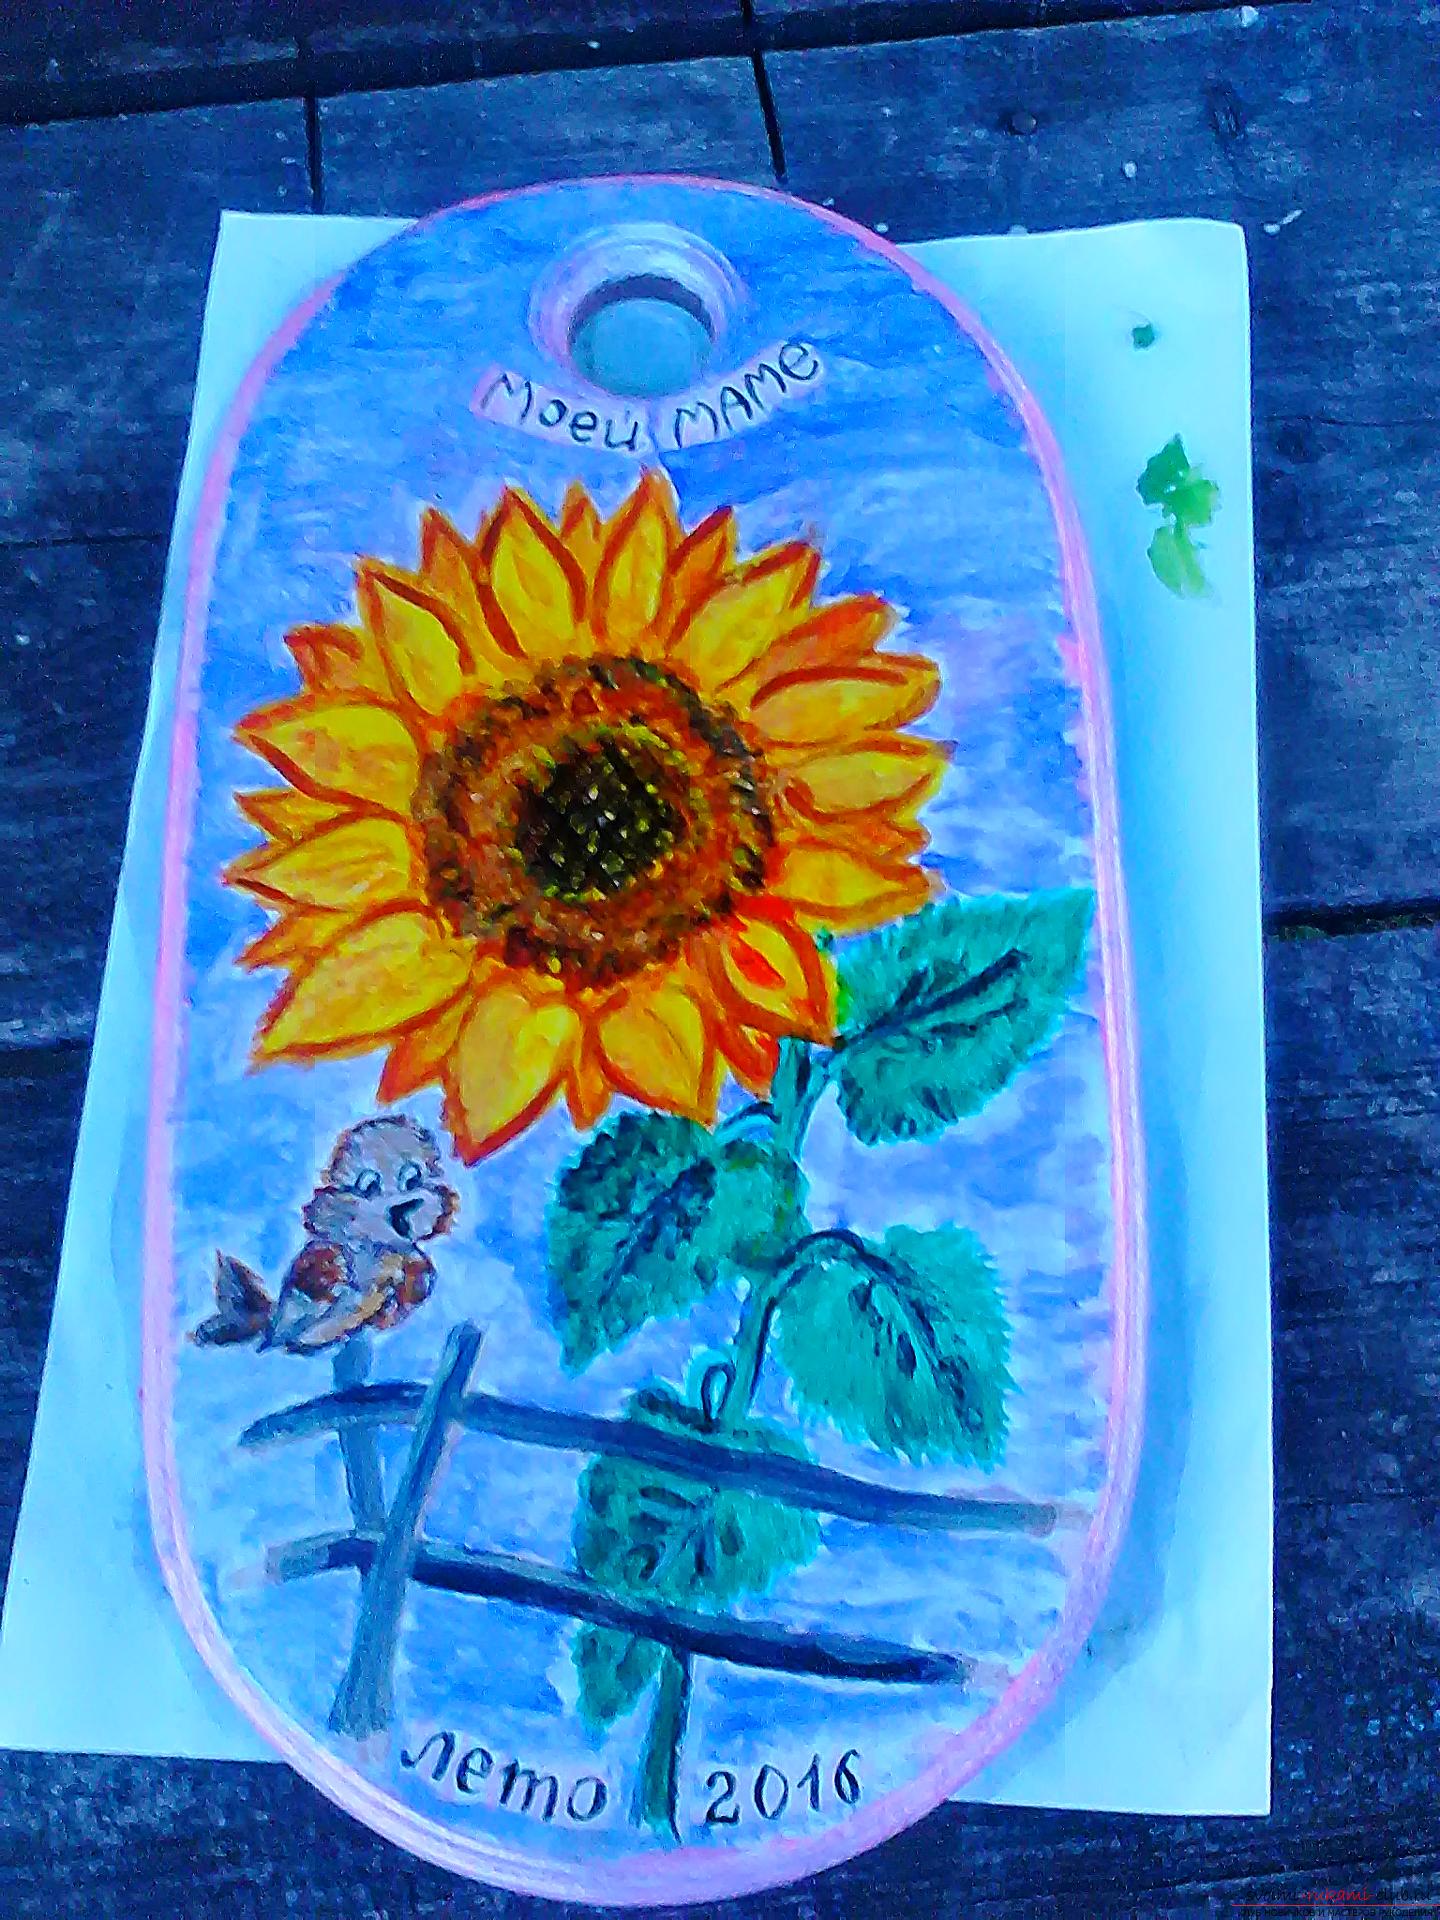 The painting of the cutting board with sunflowers. Photo # 2